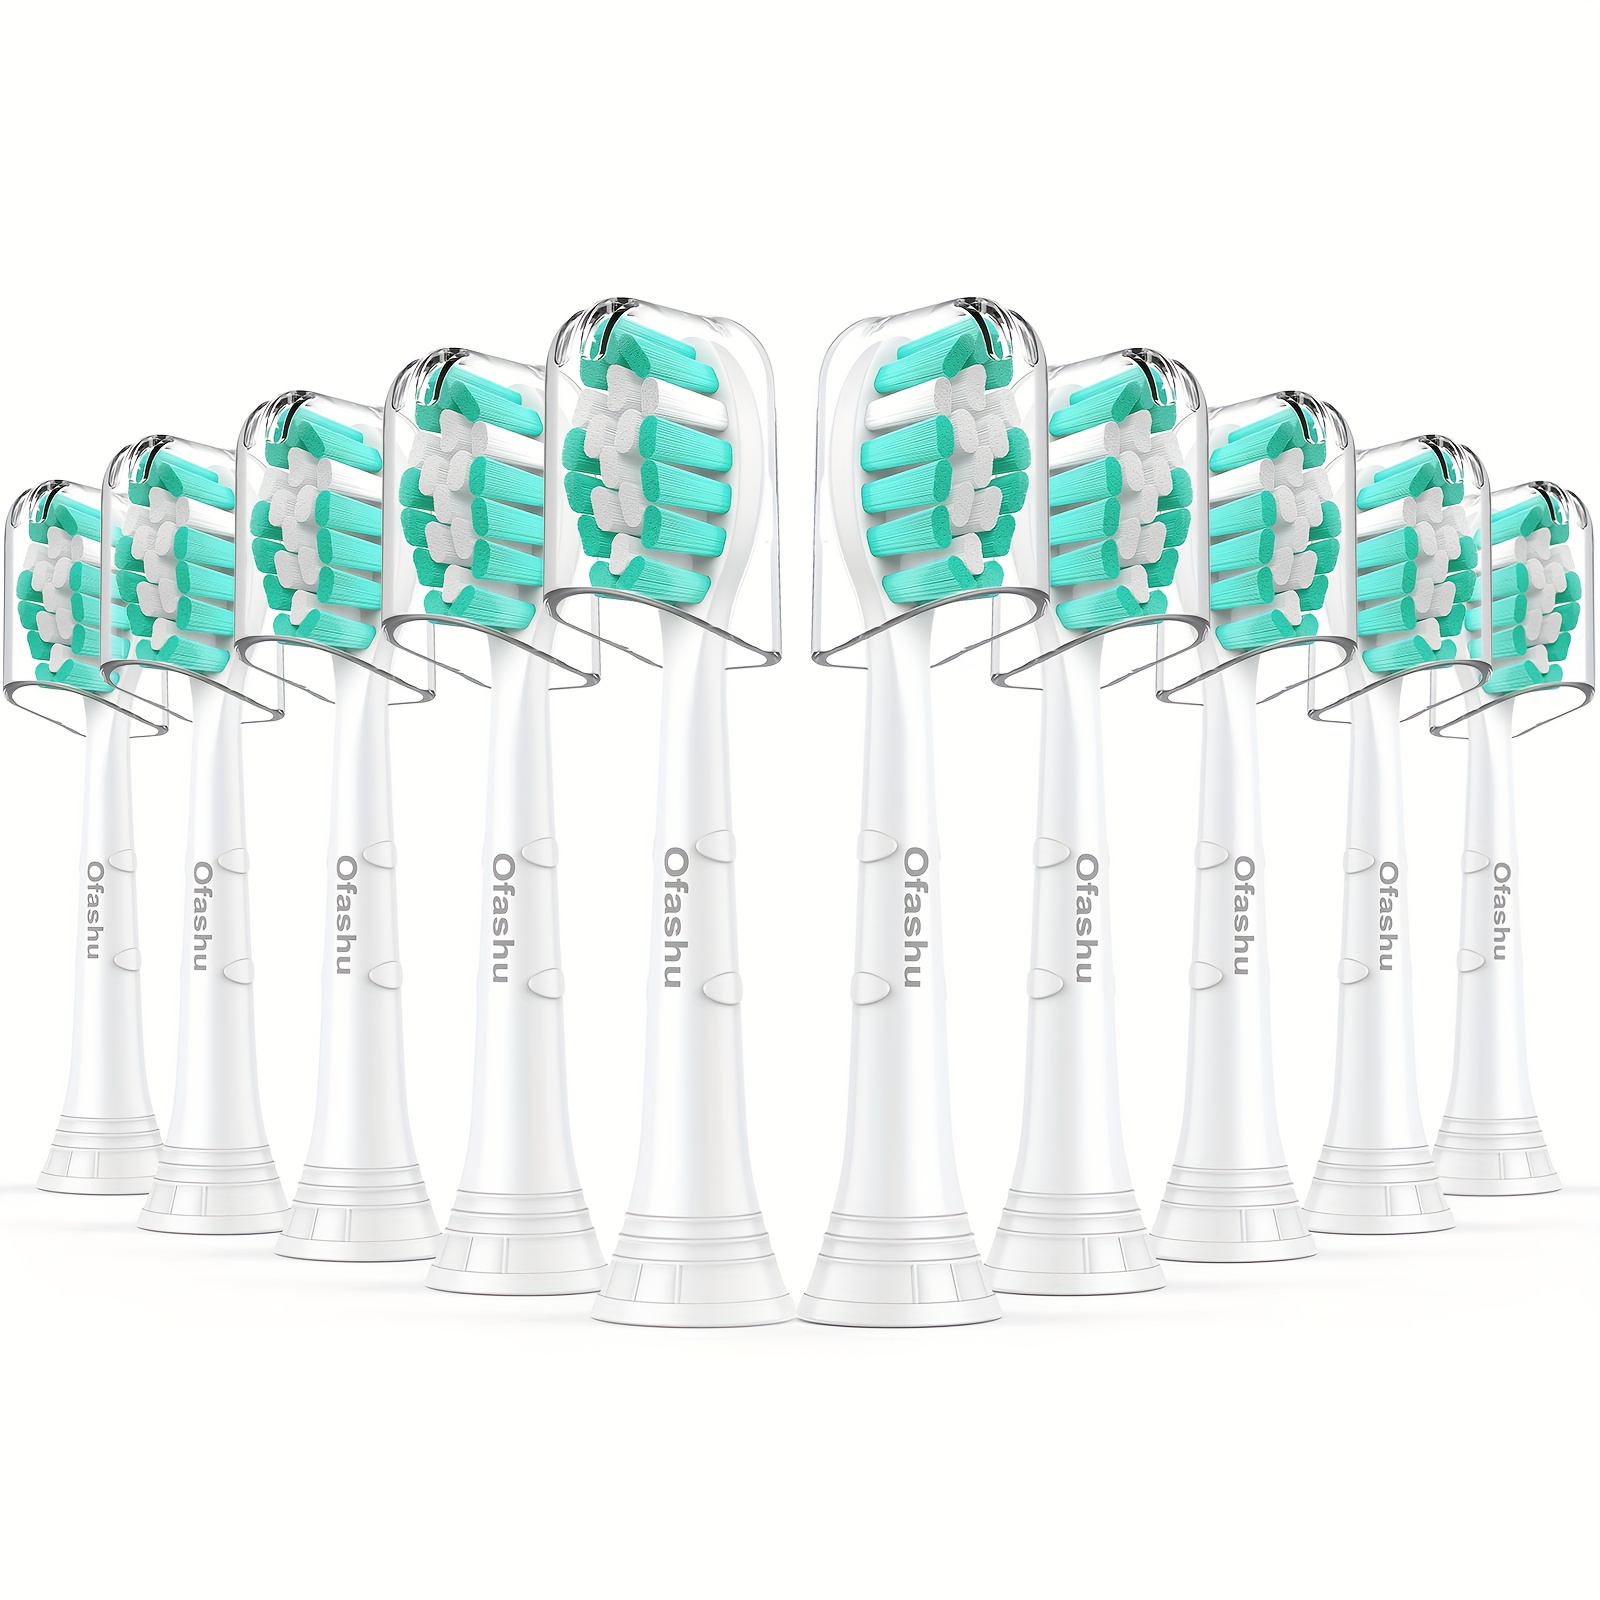 

10pcs Replacement Toothbrush Heads, Suitable For Philips Sonicare, Professional Electric Toothbrush Heads, Brush Heads Suitable For Philips Sonicare Replacement Heads